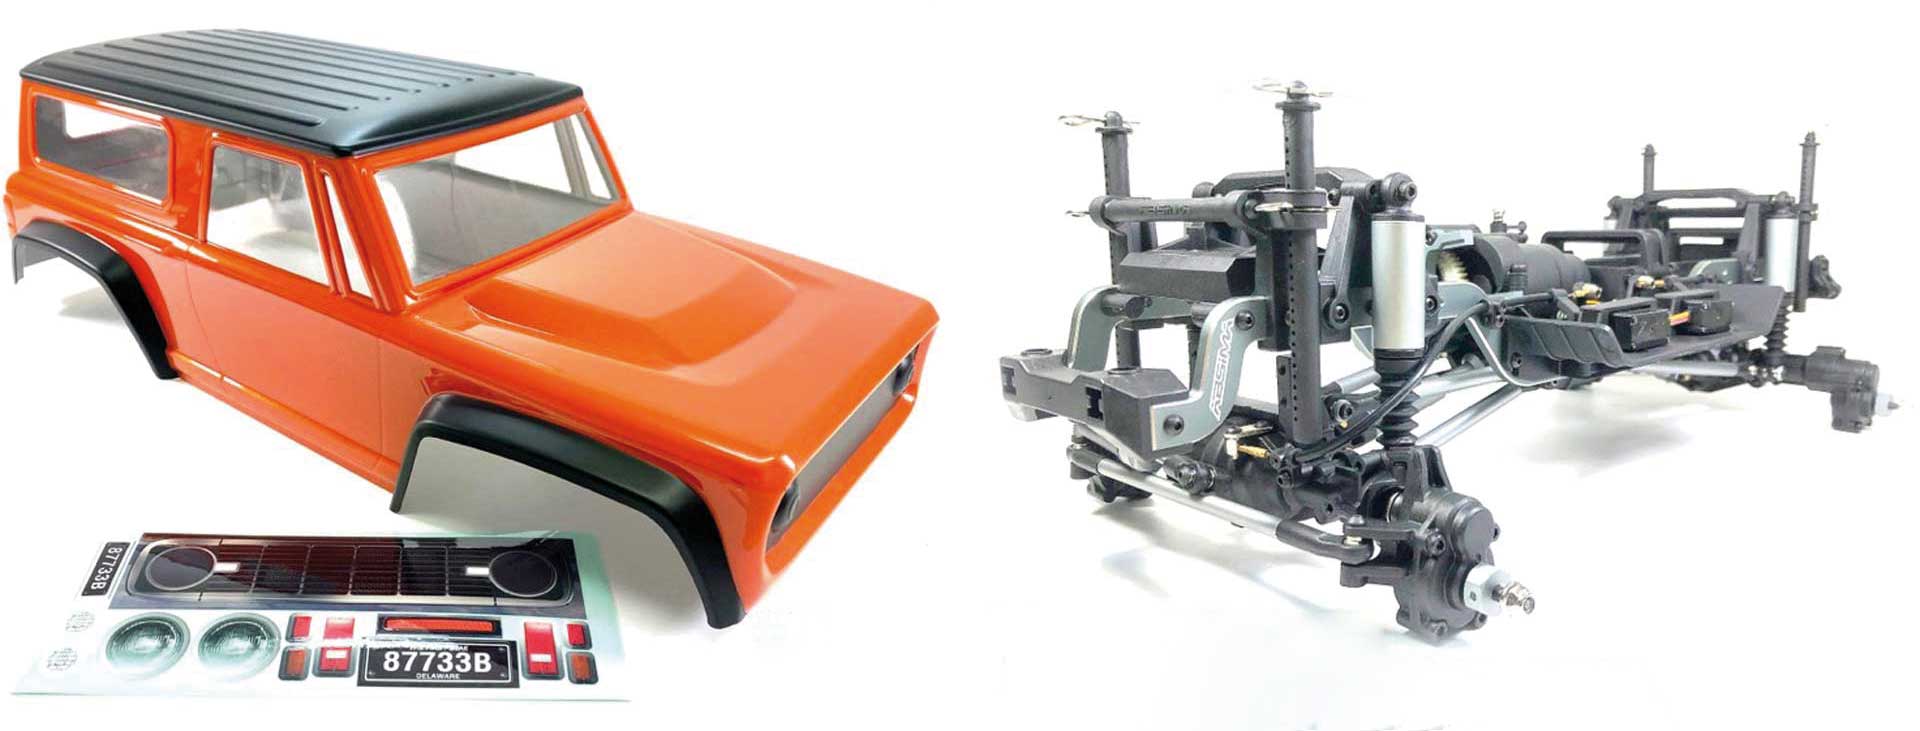 ABSIMA 1:10 EP Crawler CR3.4 Pre-assembled Chassis with Bronco Style Body Orange